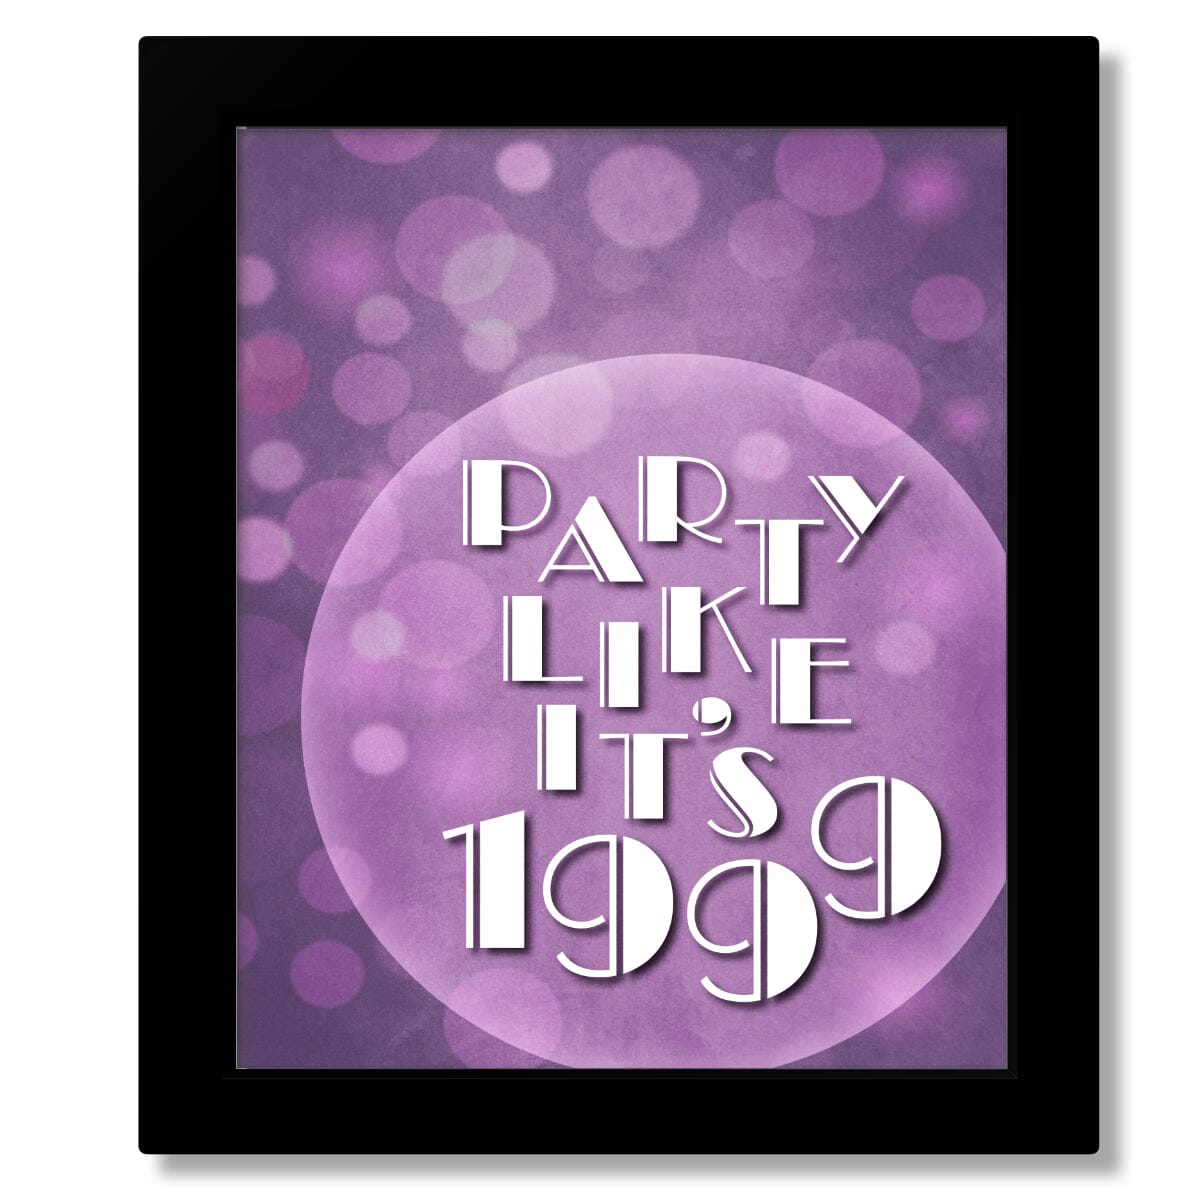 1999 by Prince - Song Lyrics Art Print Inspired Music Poster Song Lyrics Art Song Lyrics Art 8x10 Framed Print (without mat) 